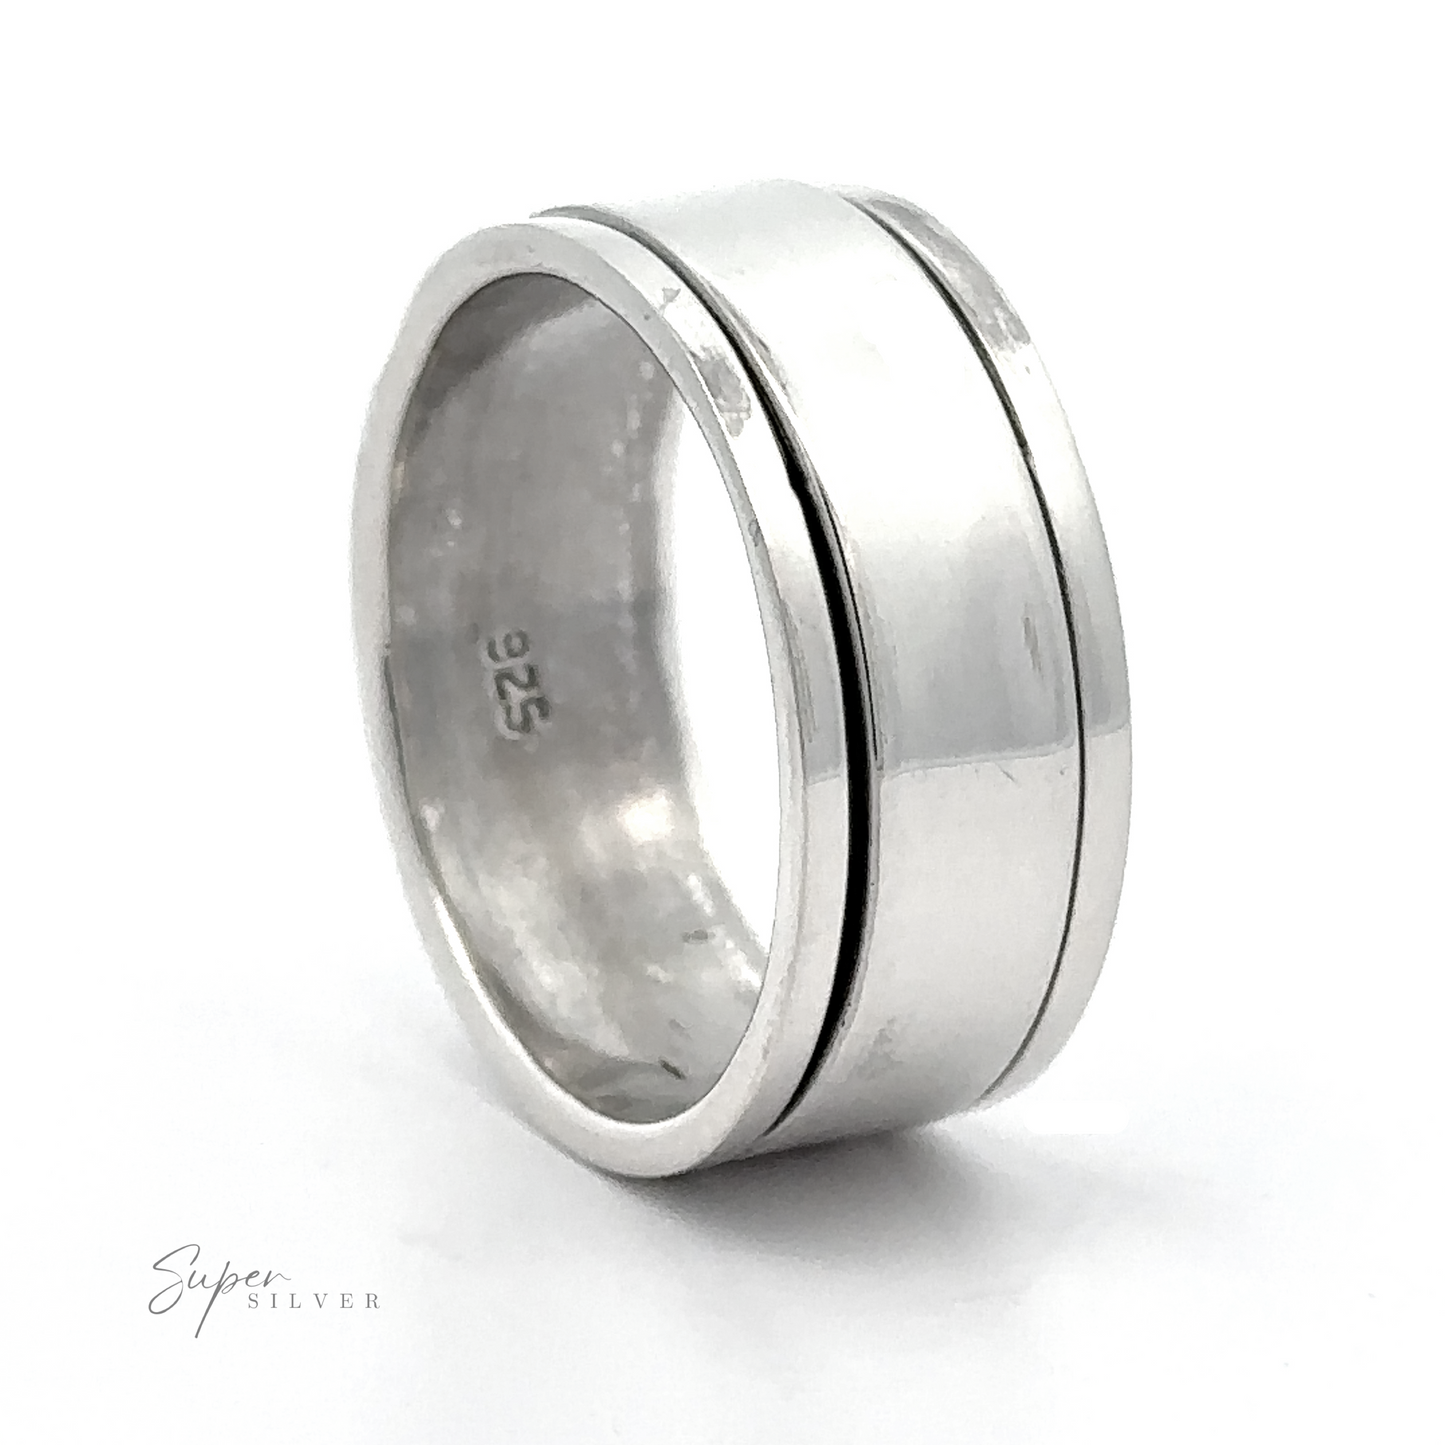 A Simple Silver Spinner Band wedding ring with a classic curved design.